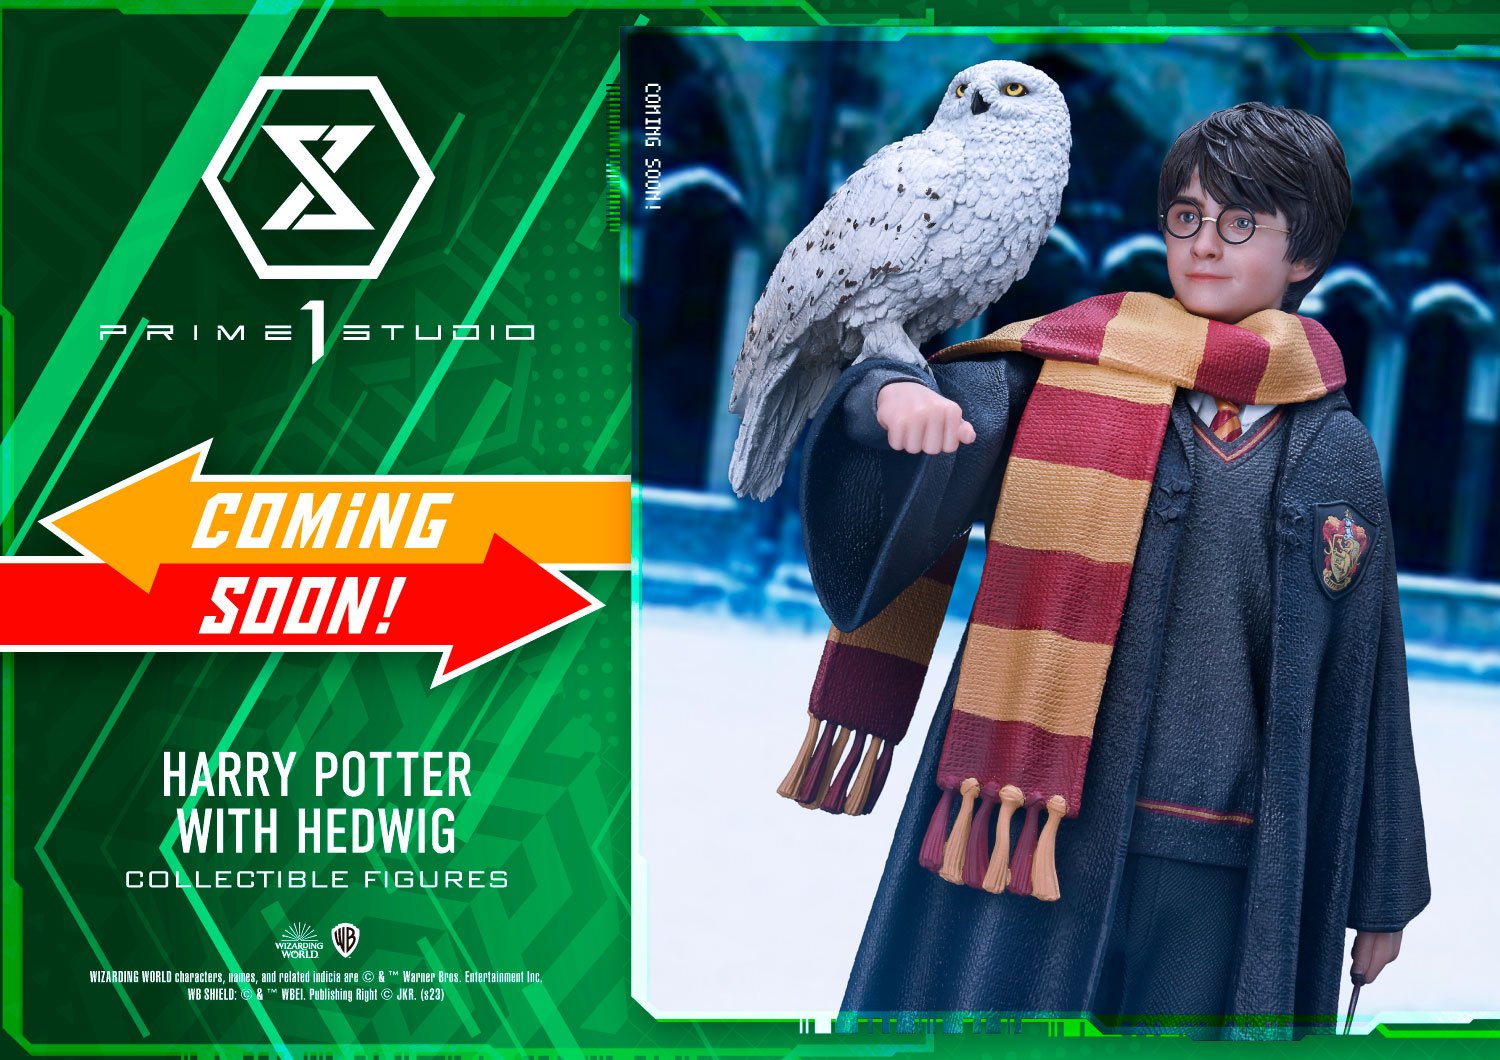 Harry Potter Harry Potter with Hedwig